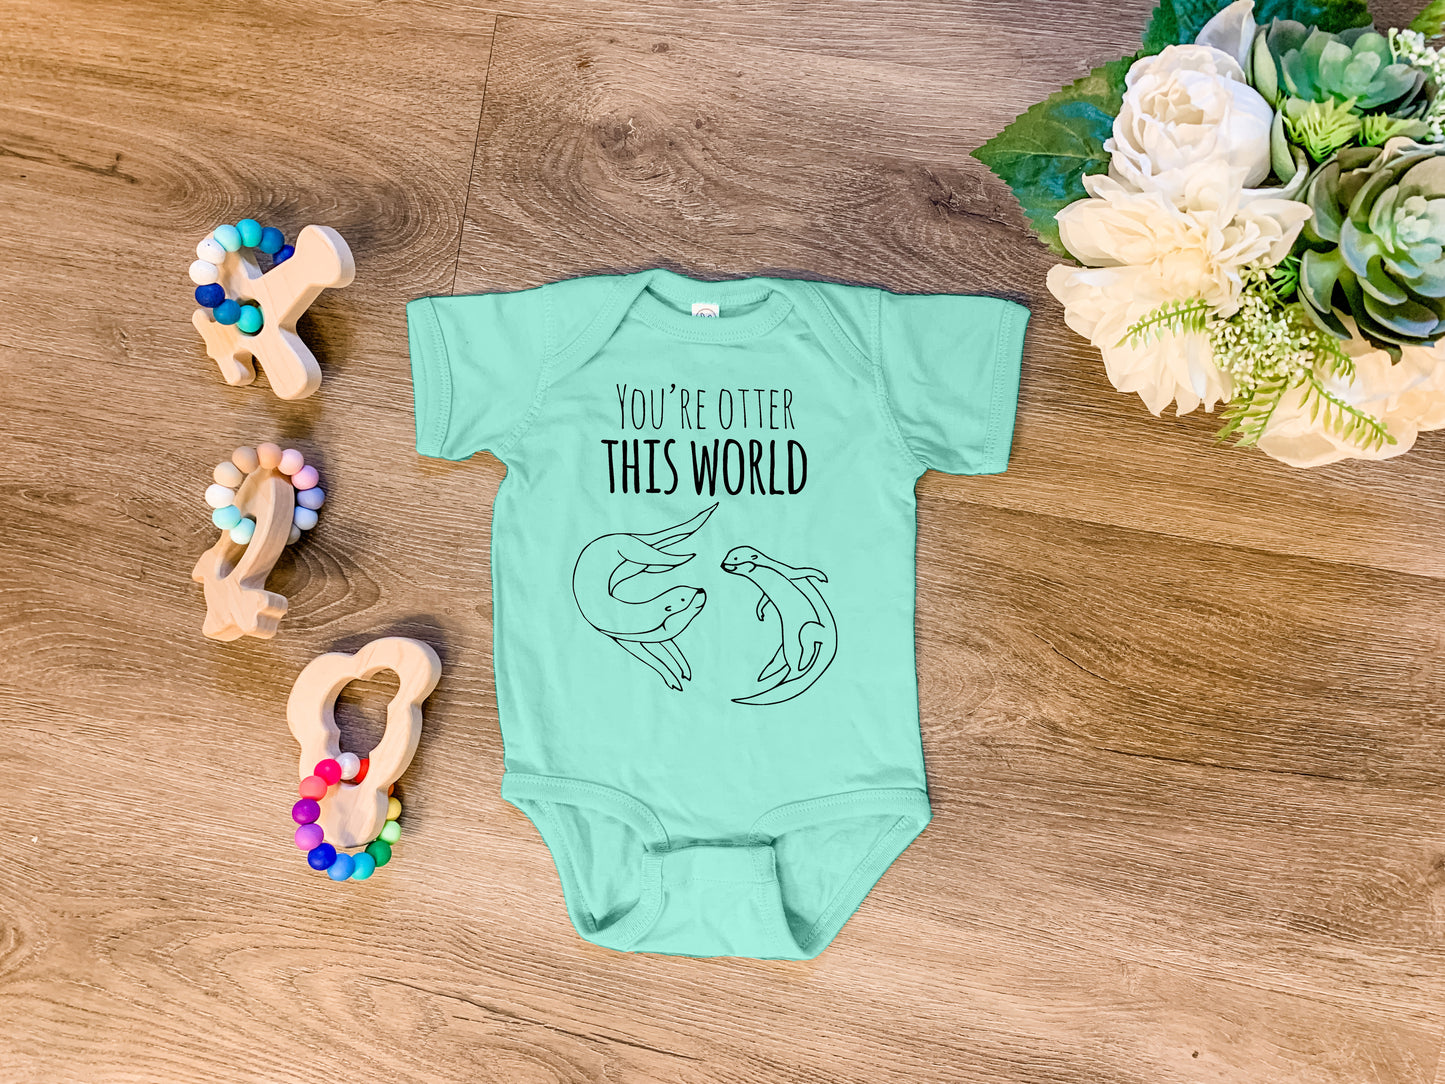 You're Otter This World - Onesie - Heather Gray, Chill, or Lavender